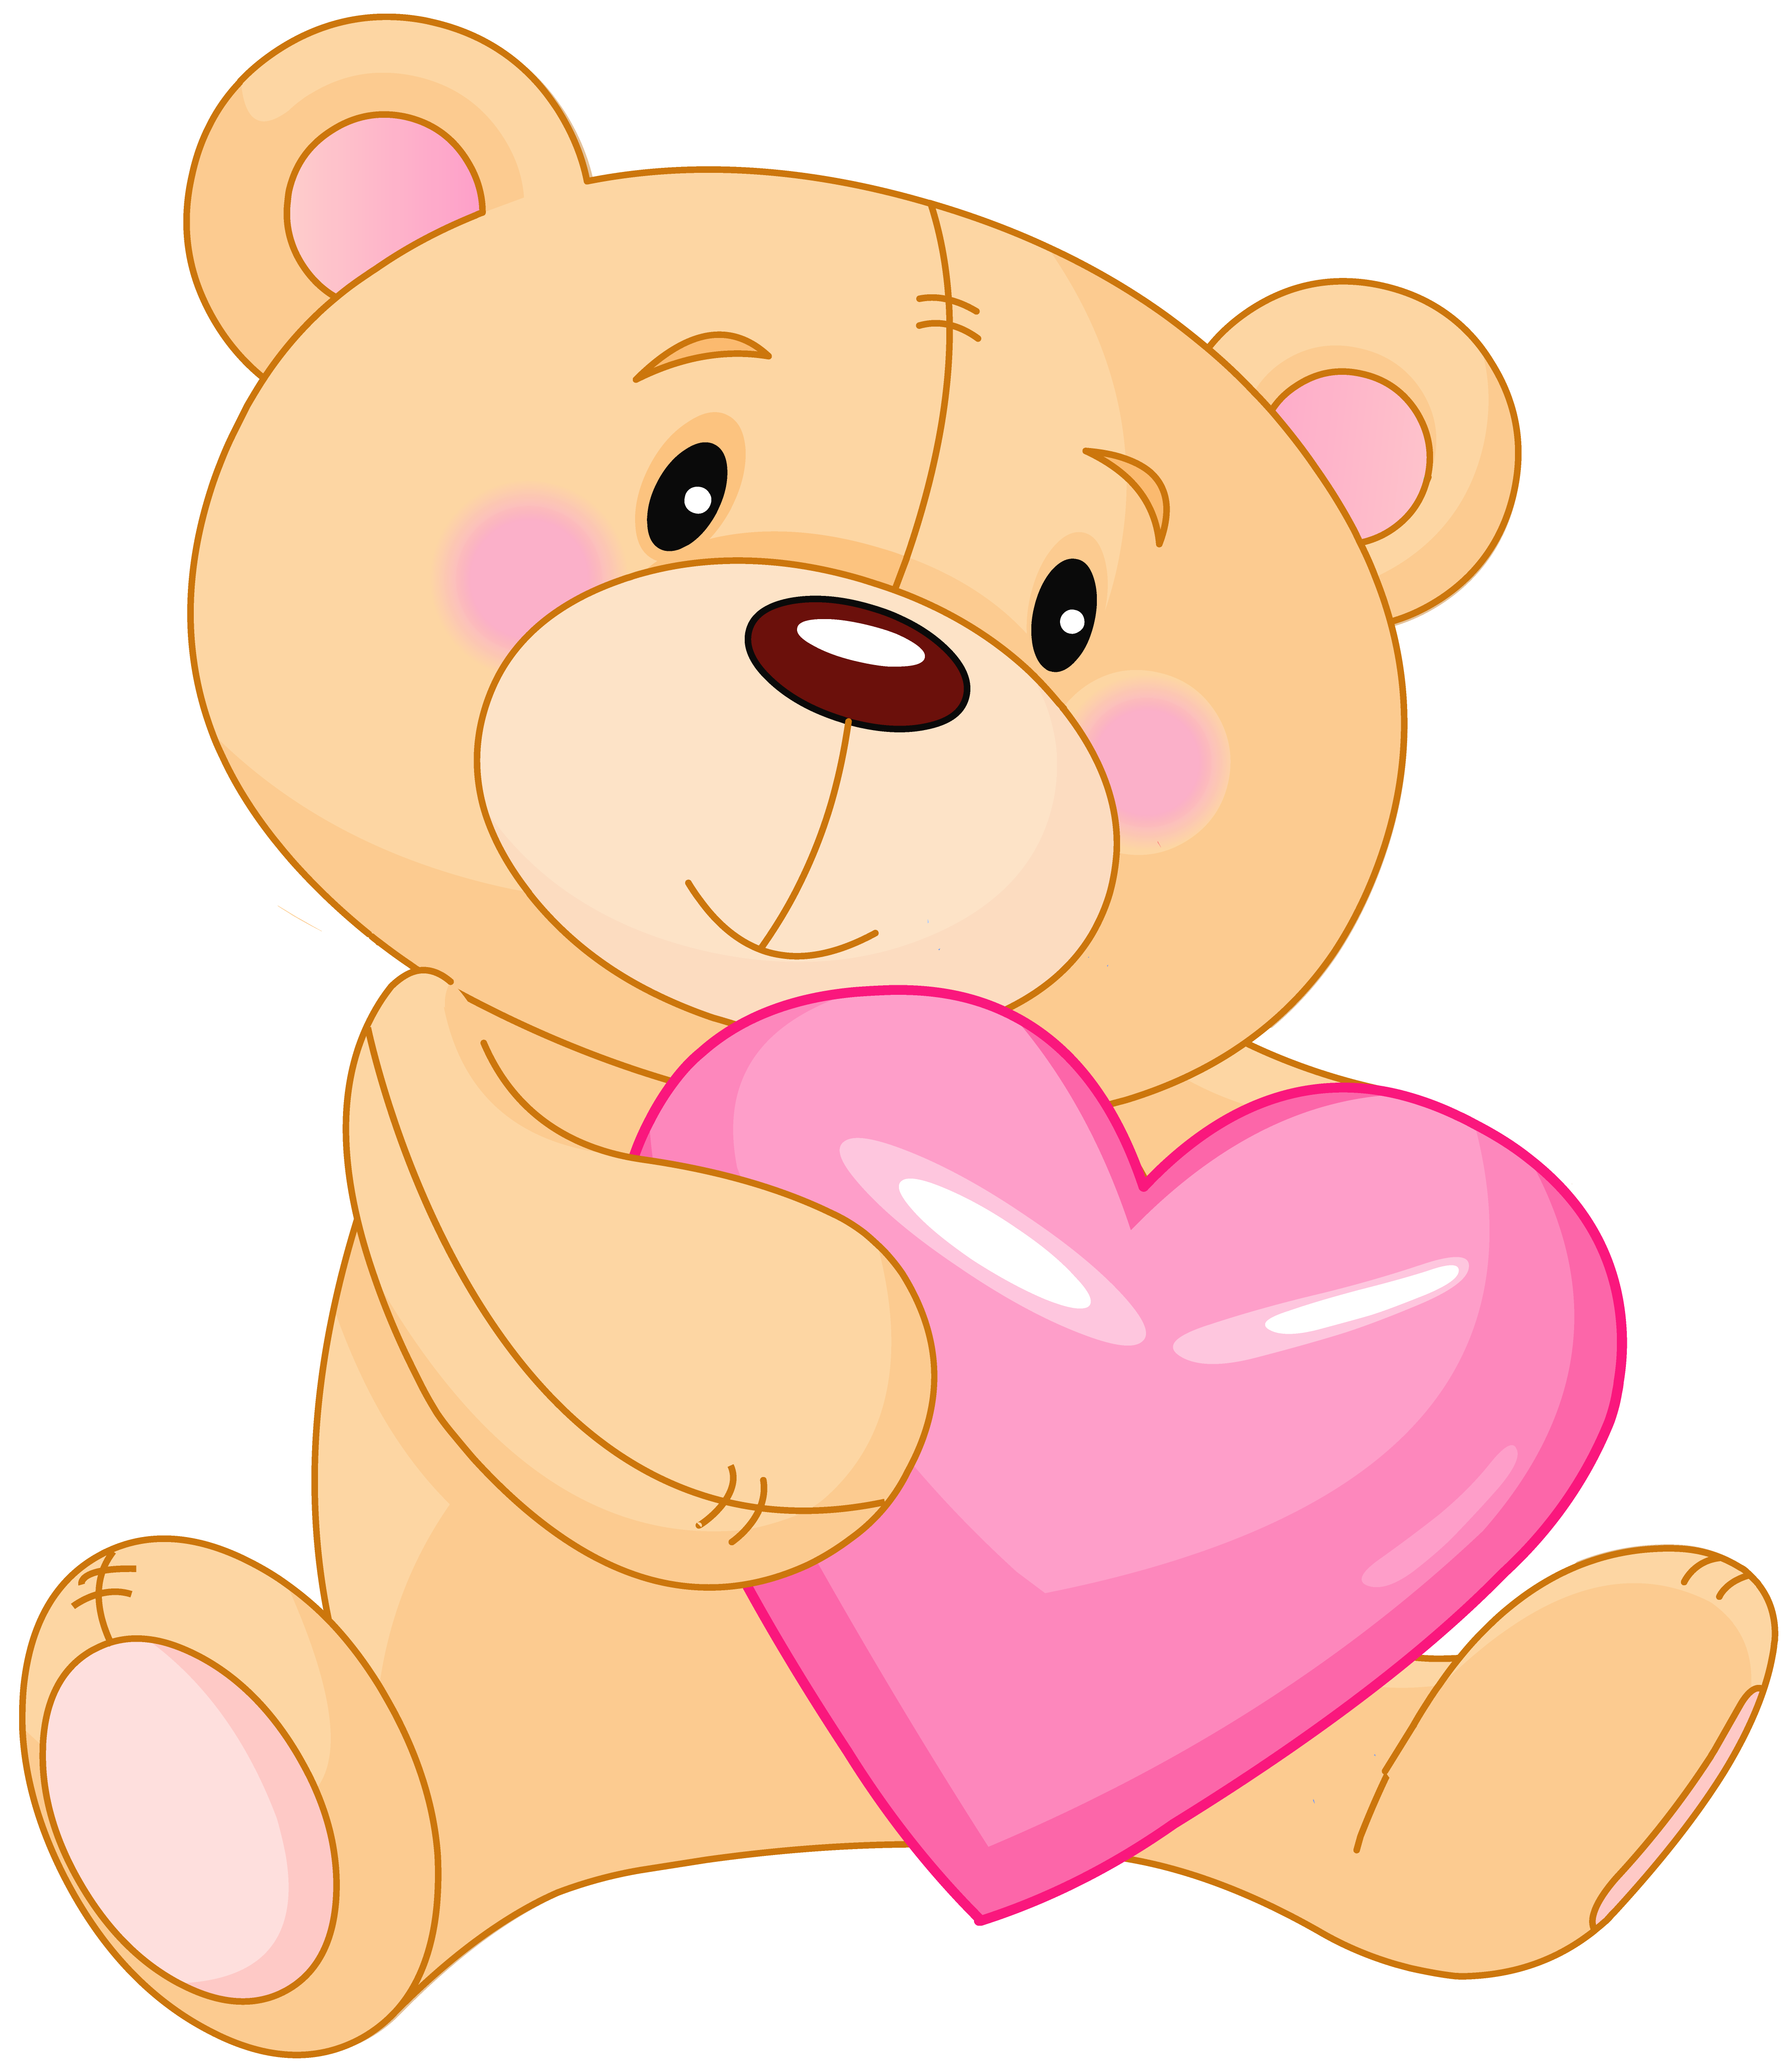 Transparent Cute Teddy with Pink Heart PNG Clipart